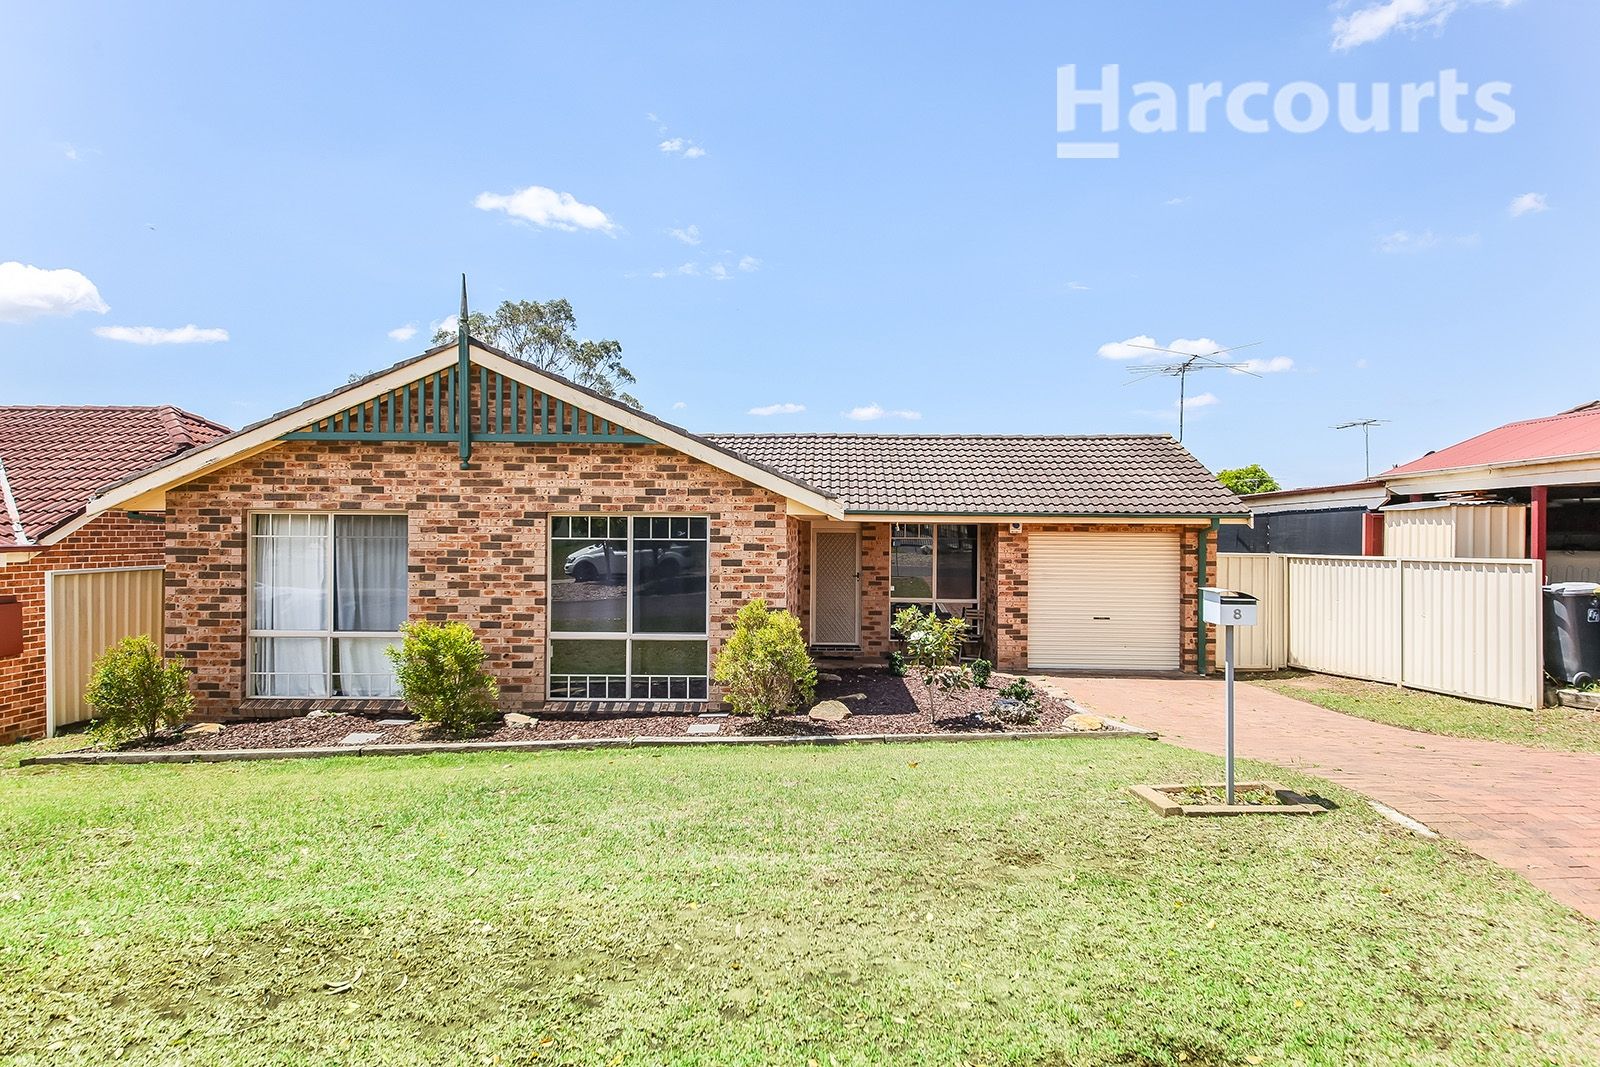 3 bedrooms House in 8 Harwood Place ST HELENS PARK NSW, 2560